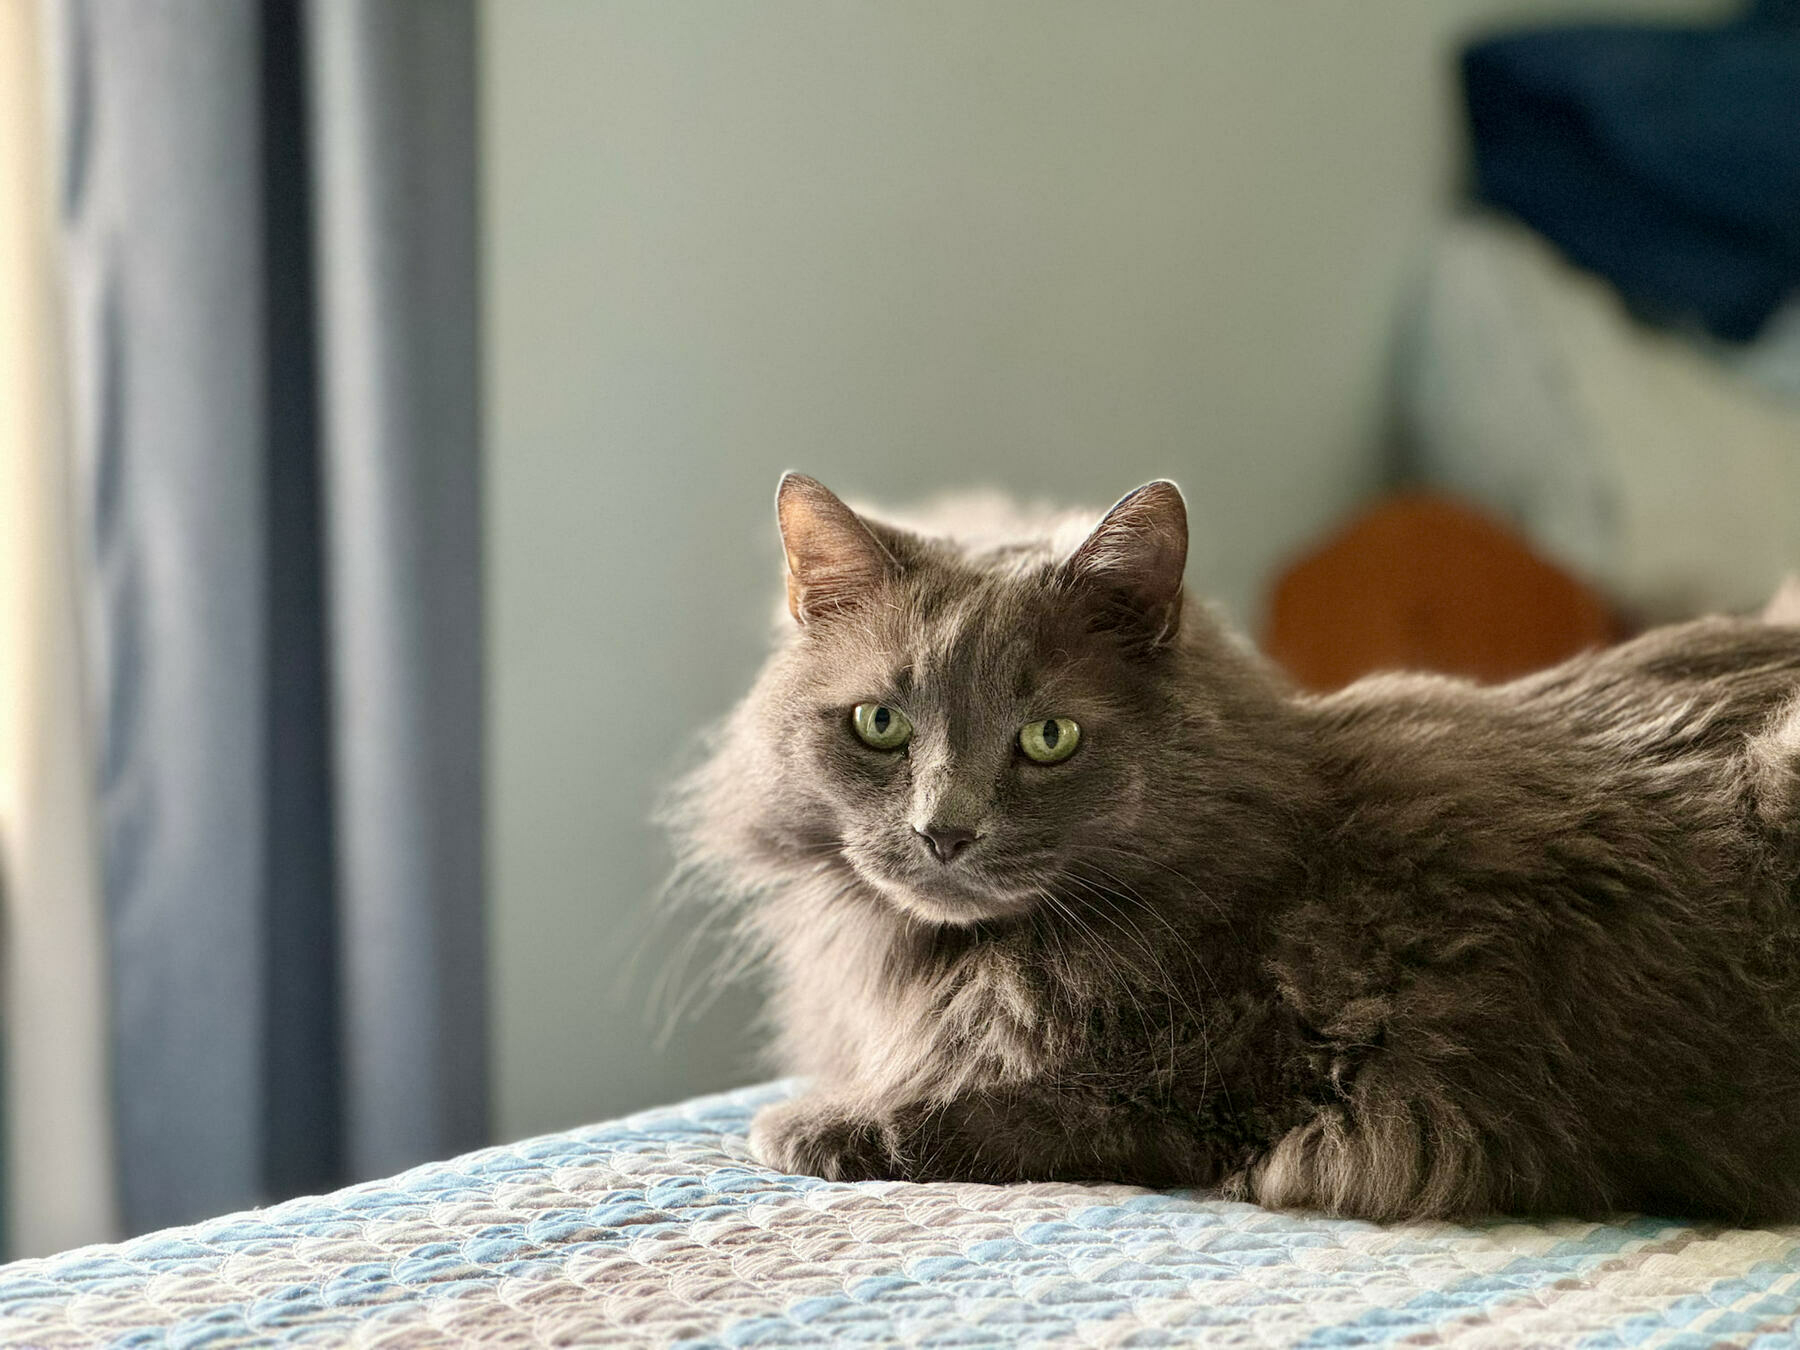 Grey cat, with yellow eyes, on a bed, looking at the camera.